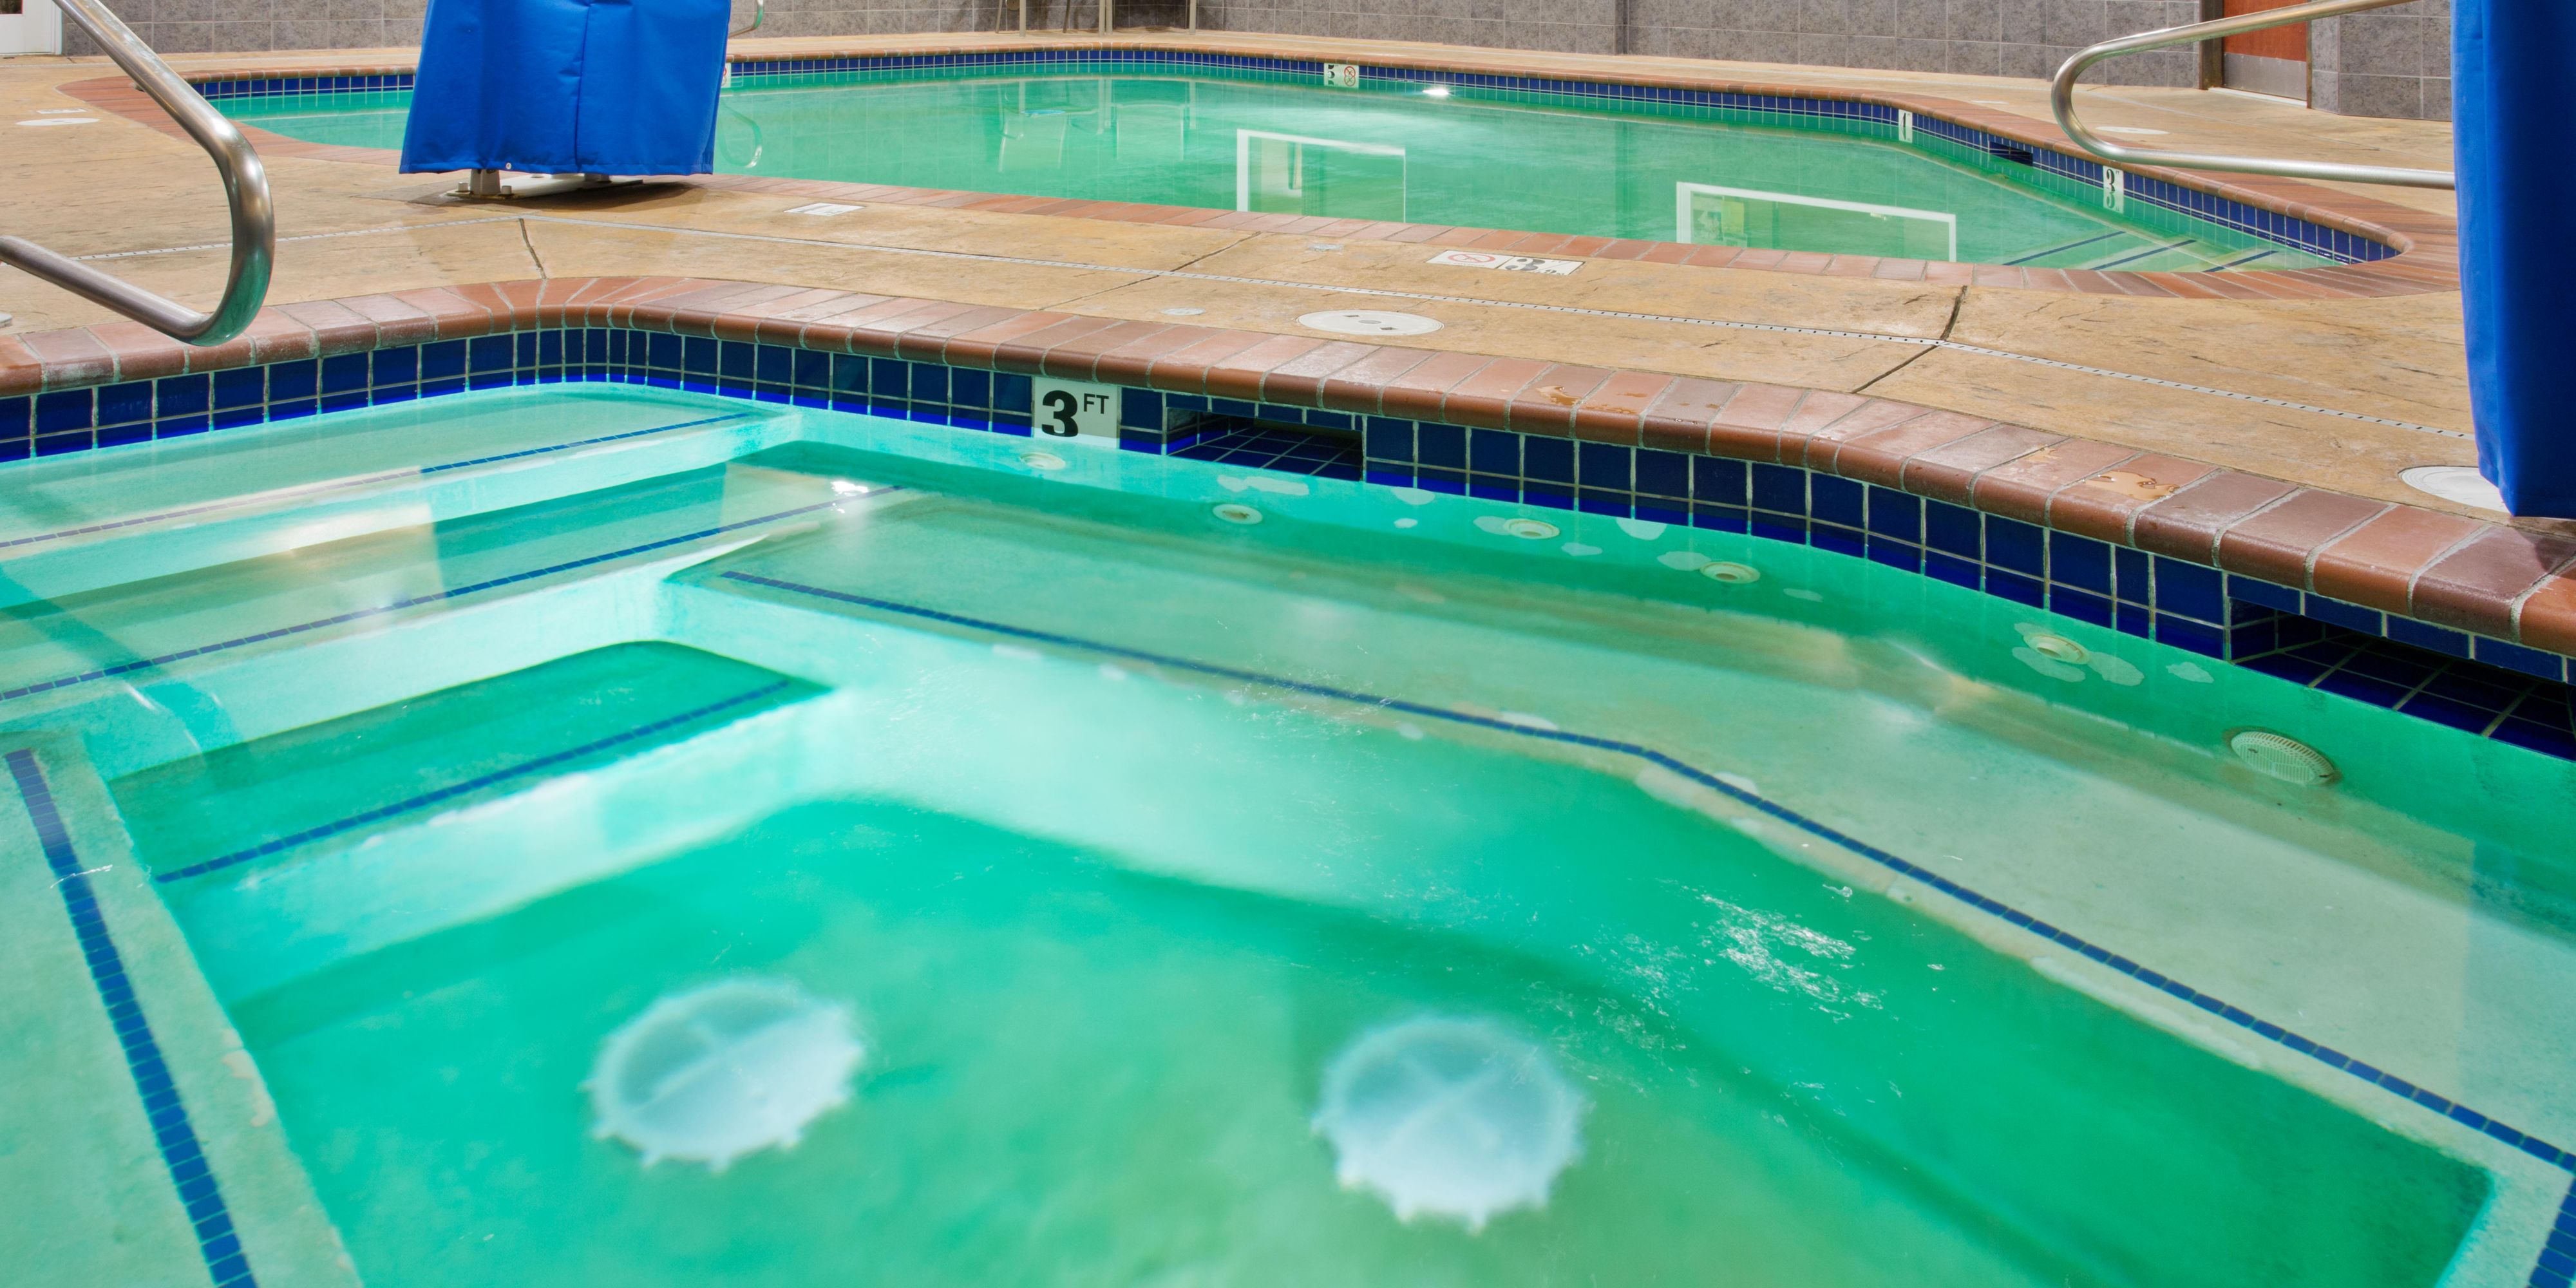 Come swim and relax at our now opened swimming pool and hot tub area. 
Reservations will be needed upon arrival. 